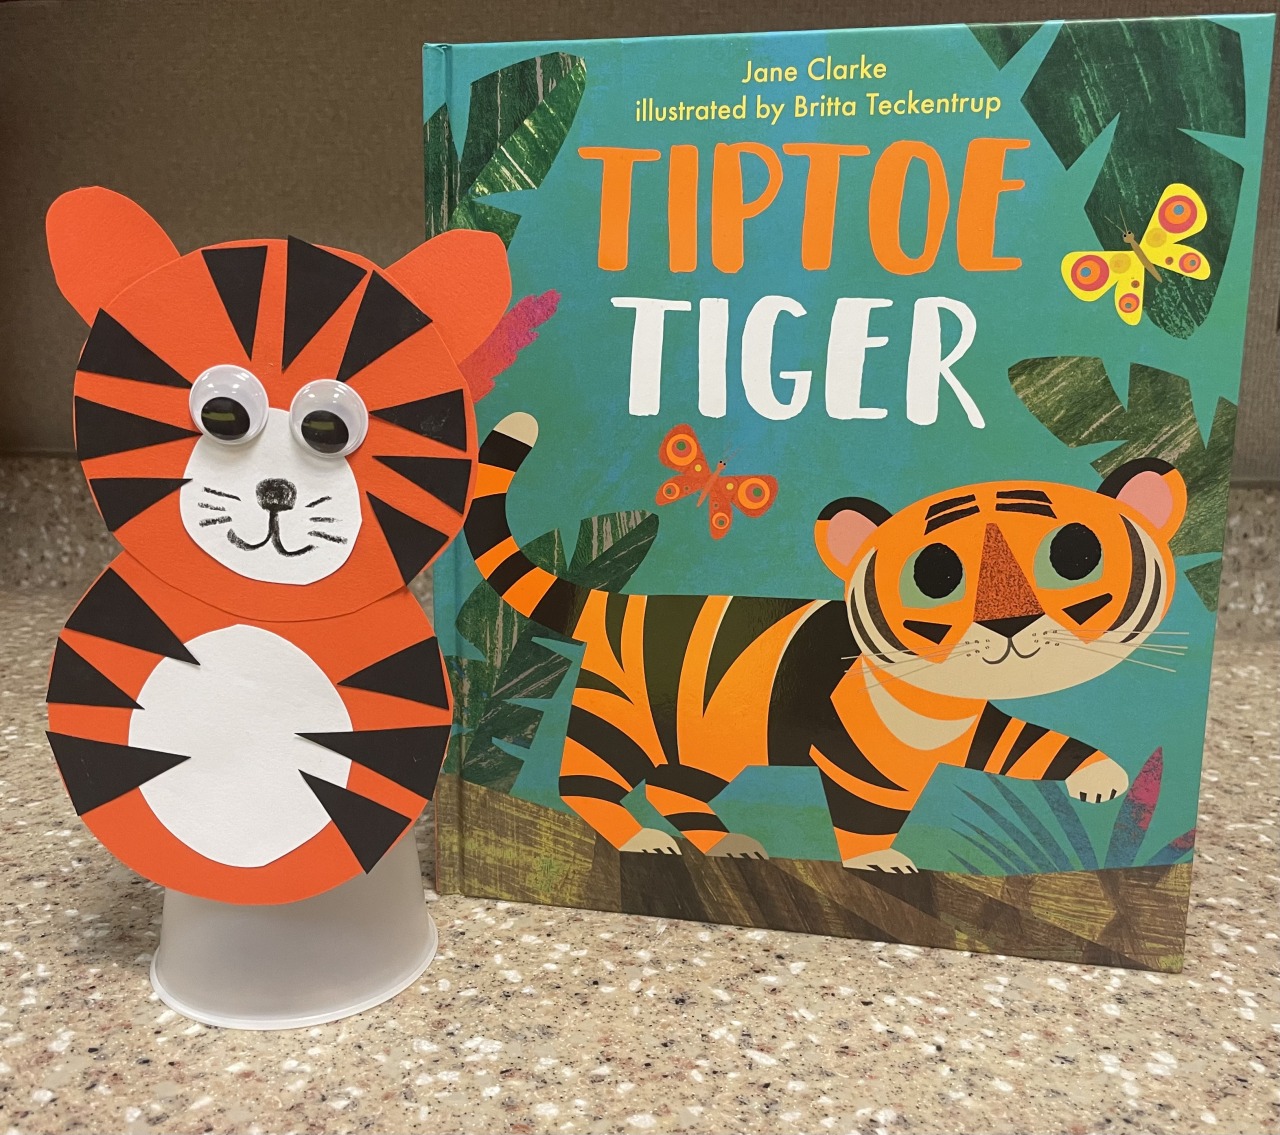 The book shows an illustrated tiger walking through the jungle. It's pictured next to a completed craft, as described below